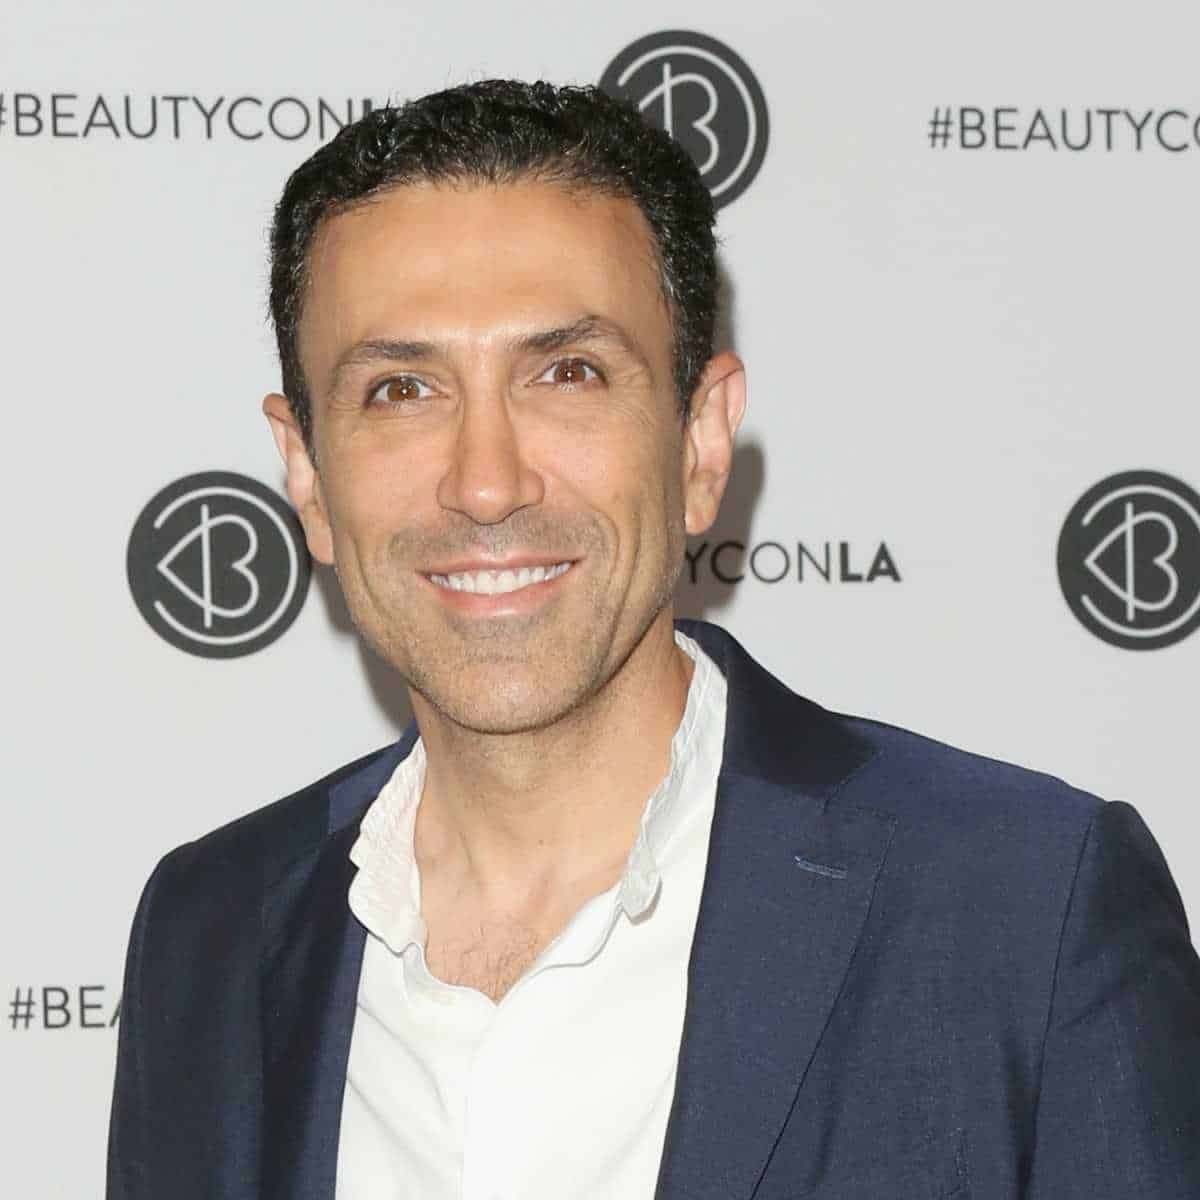 Image of a plastic surgeon, Dr. Simon Ourian